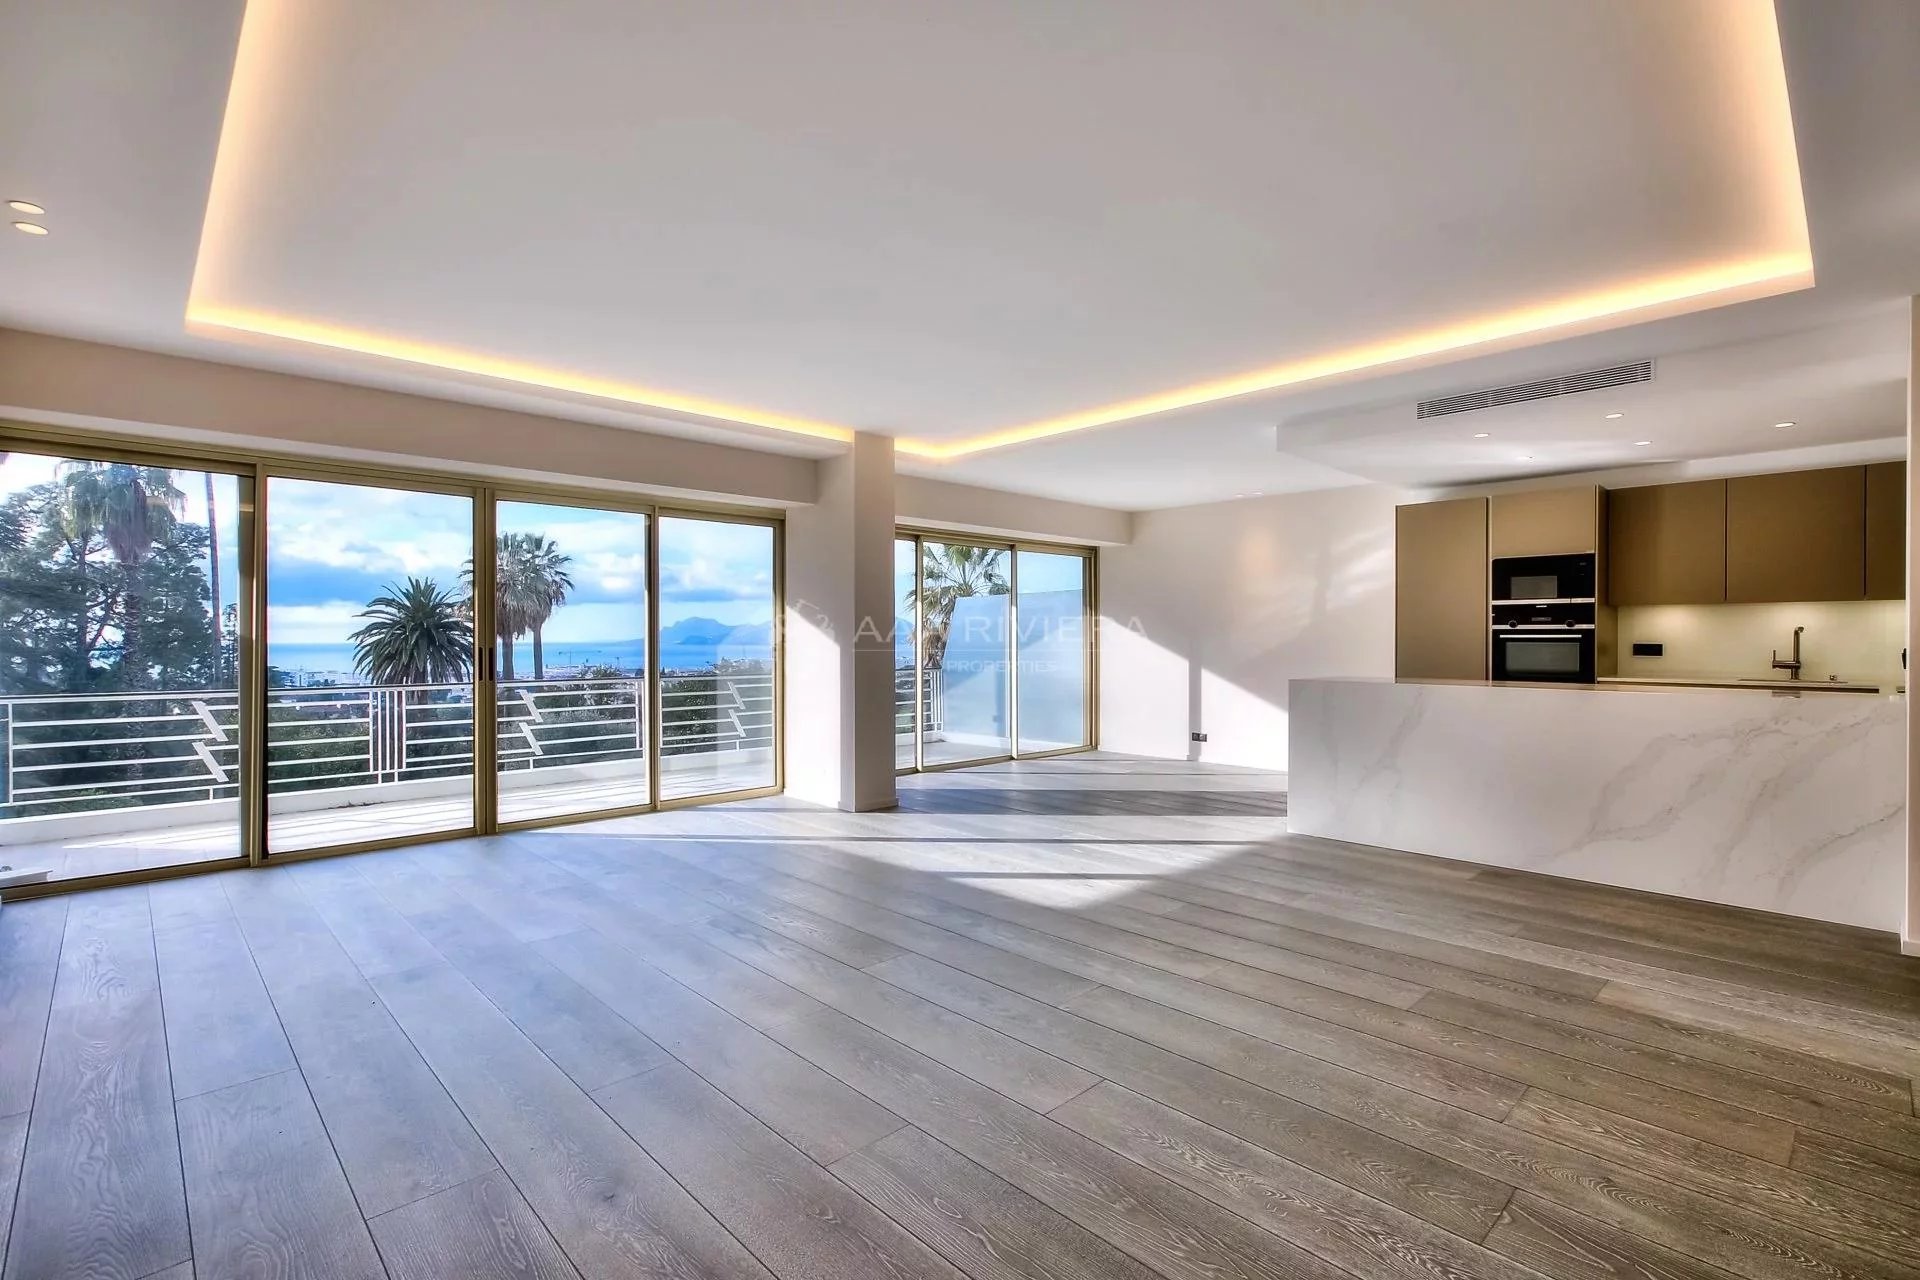 SOLD - CANNES CALIFORNIE - In sought after residence, with that all important sea view